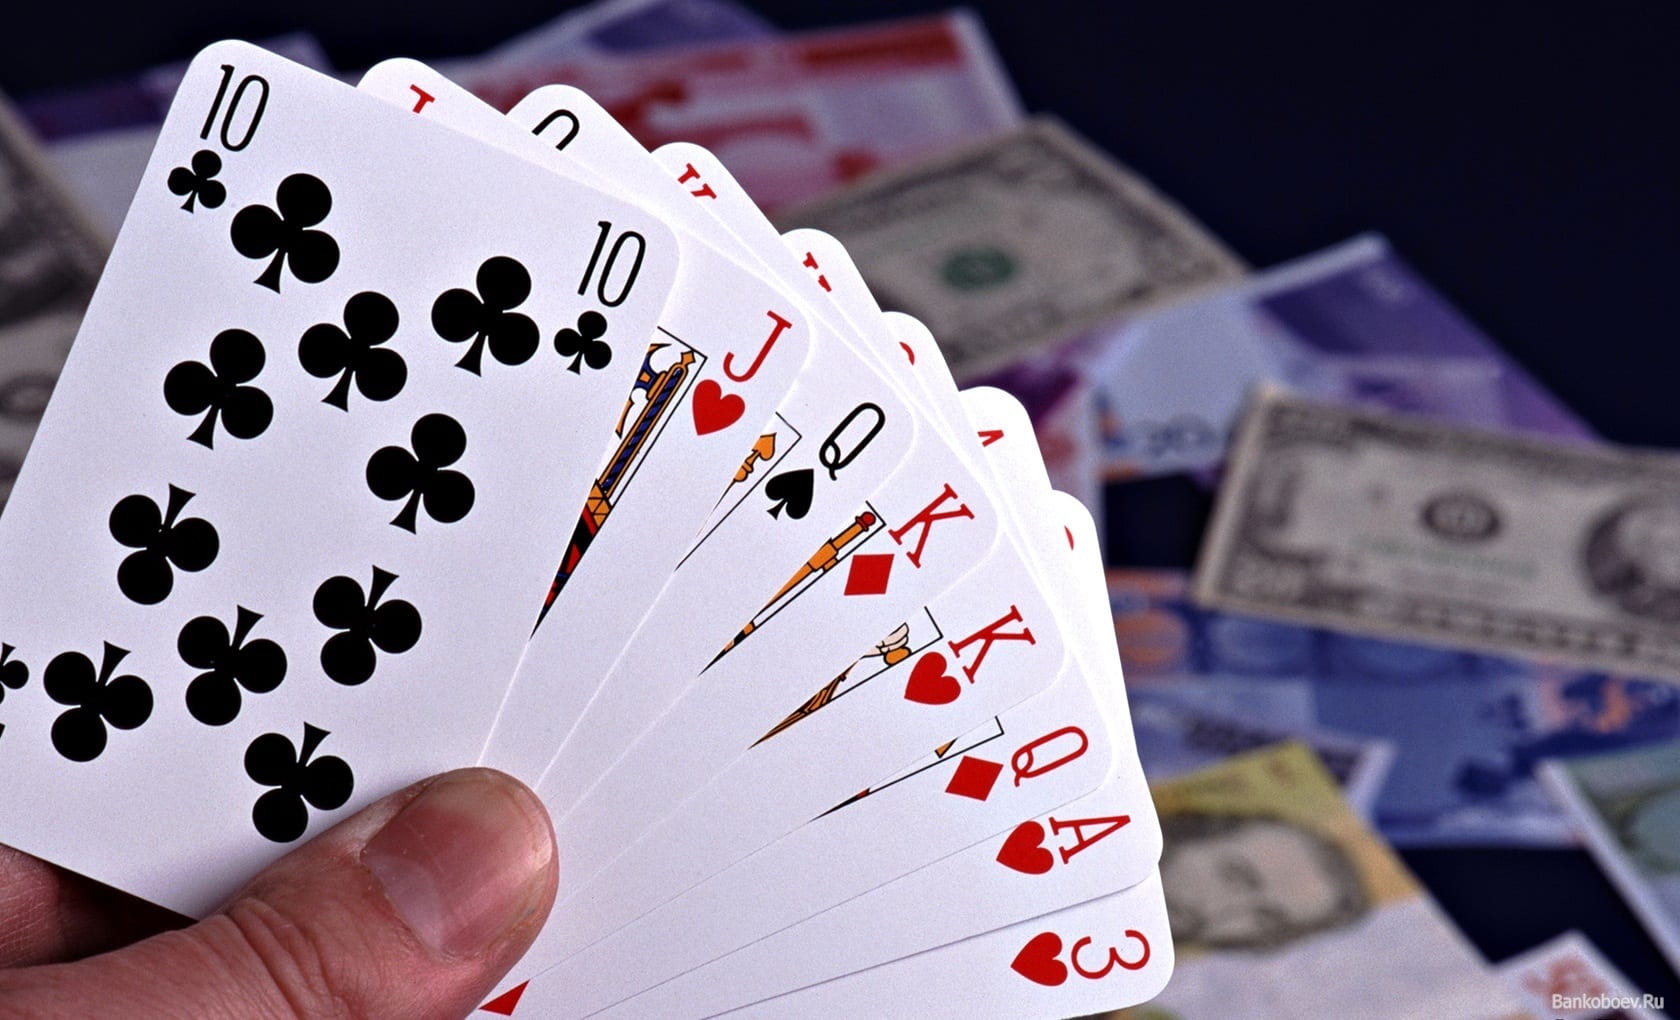 Can card games be good for your health? » Trending Us